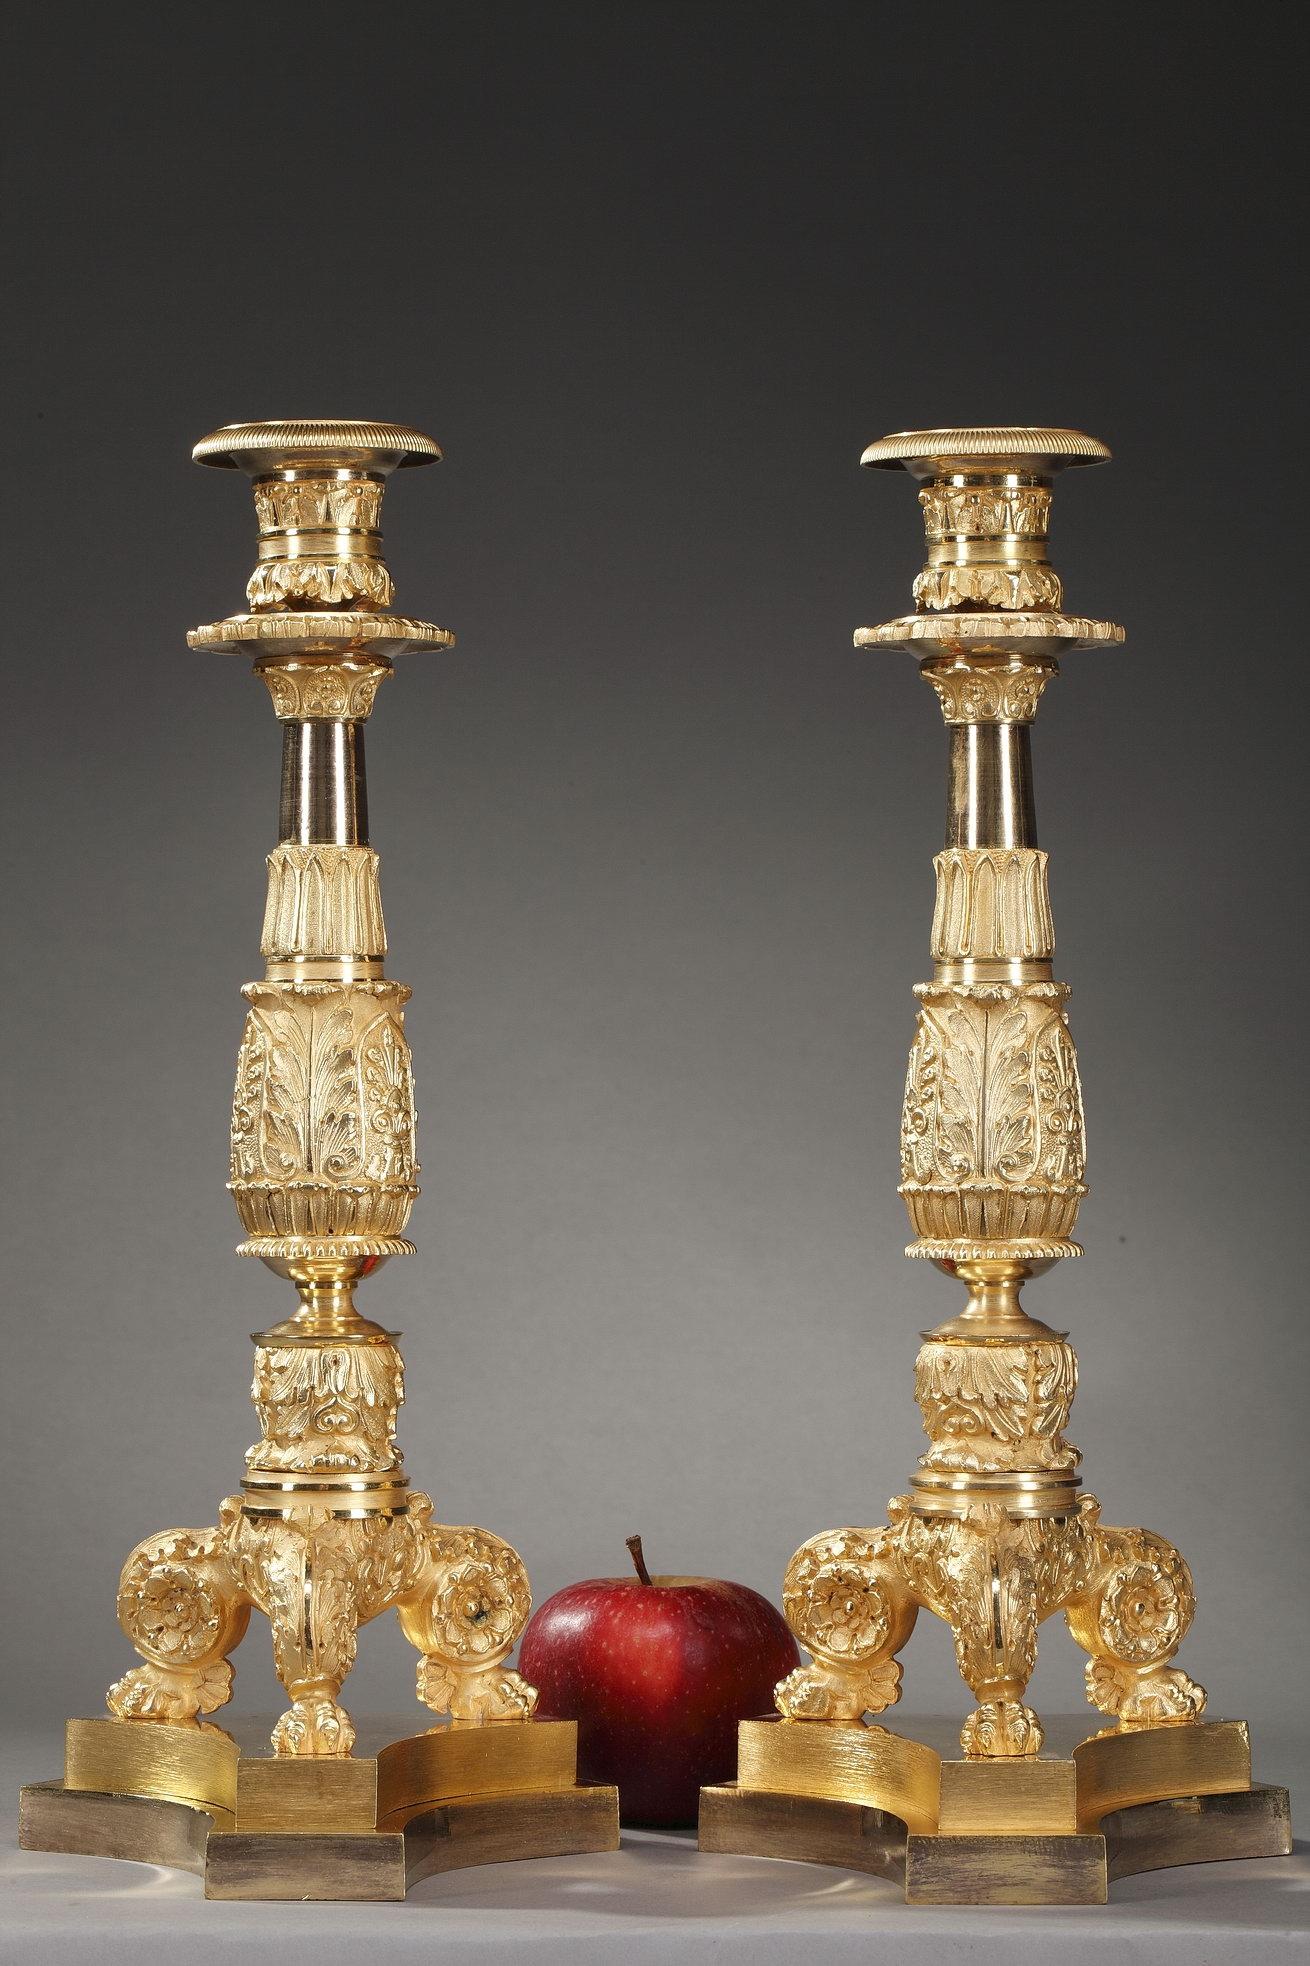 Pair of Restauration candlesticks crafted of gilt bronze, richly decorated with acanthus leaf, palmettes, scrolls, water-leaf and flowers. Each candlestick rests on three foliated claw feet above a tripod base with chamfered angles,

circa